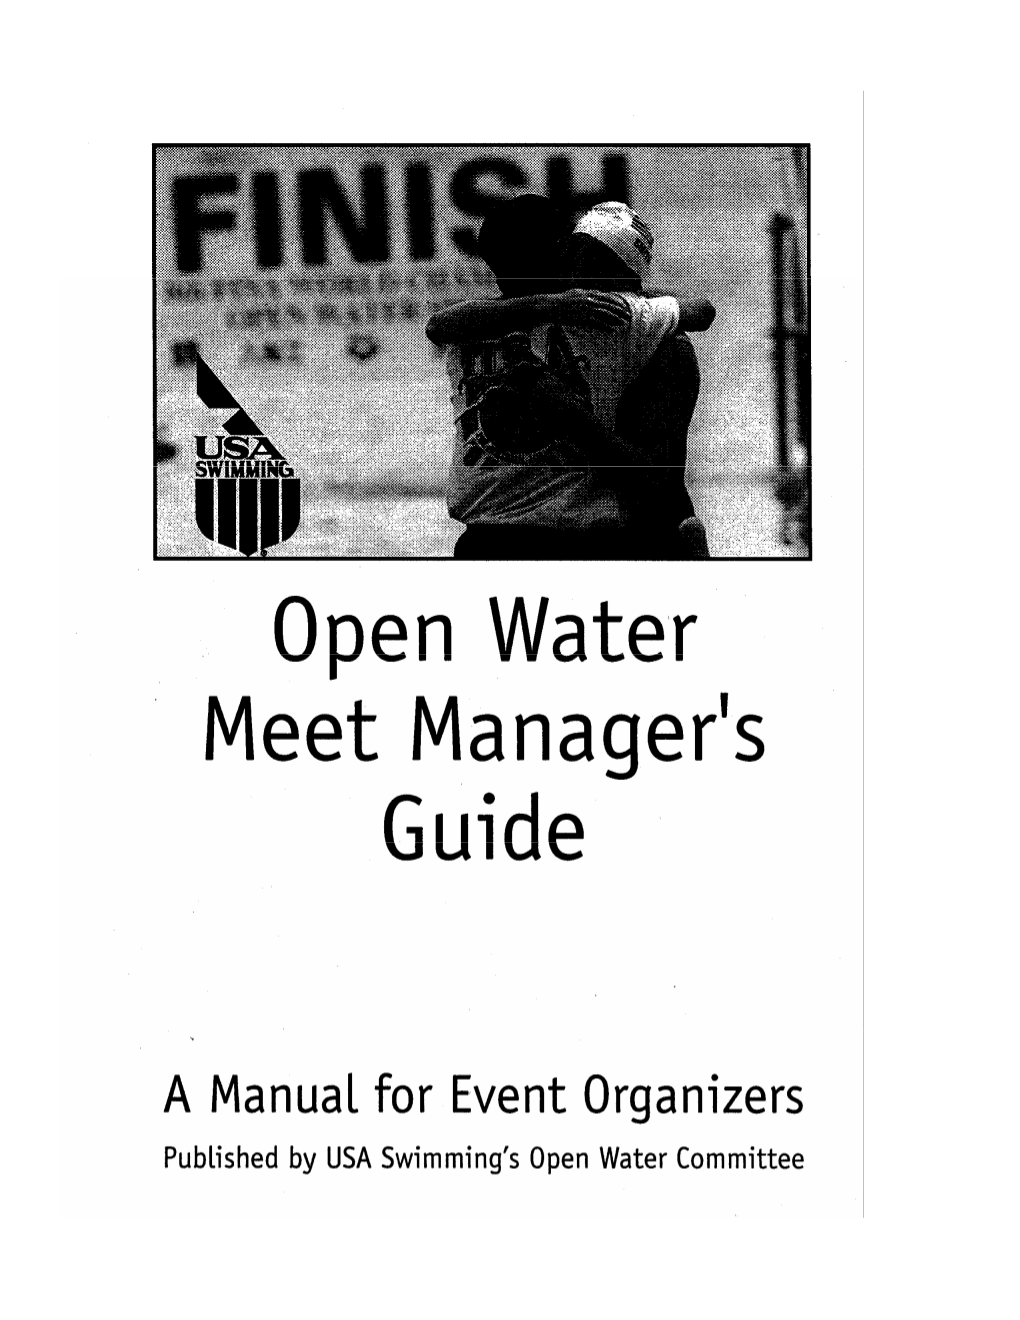 USA Swimming Open Water Meet Manager's Guide